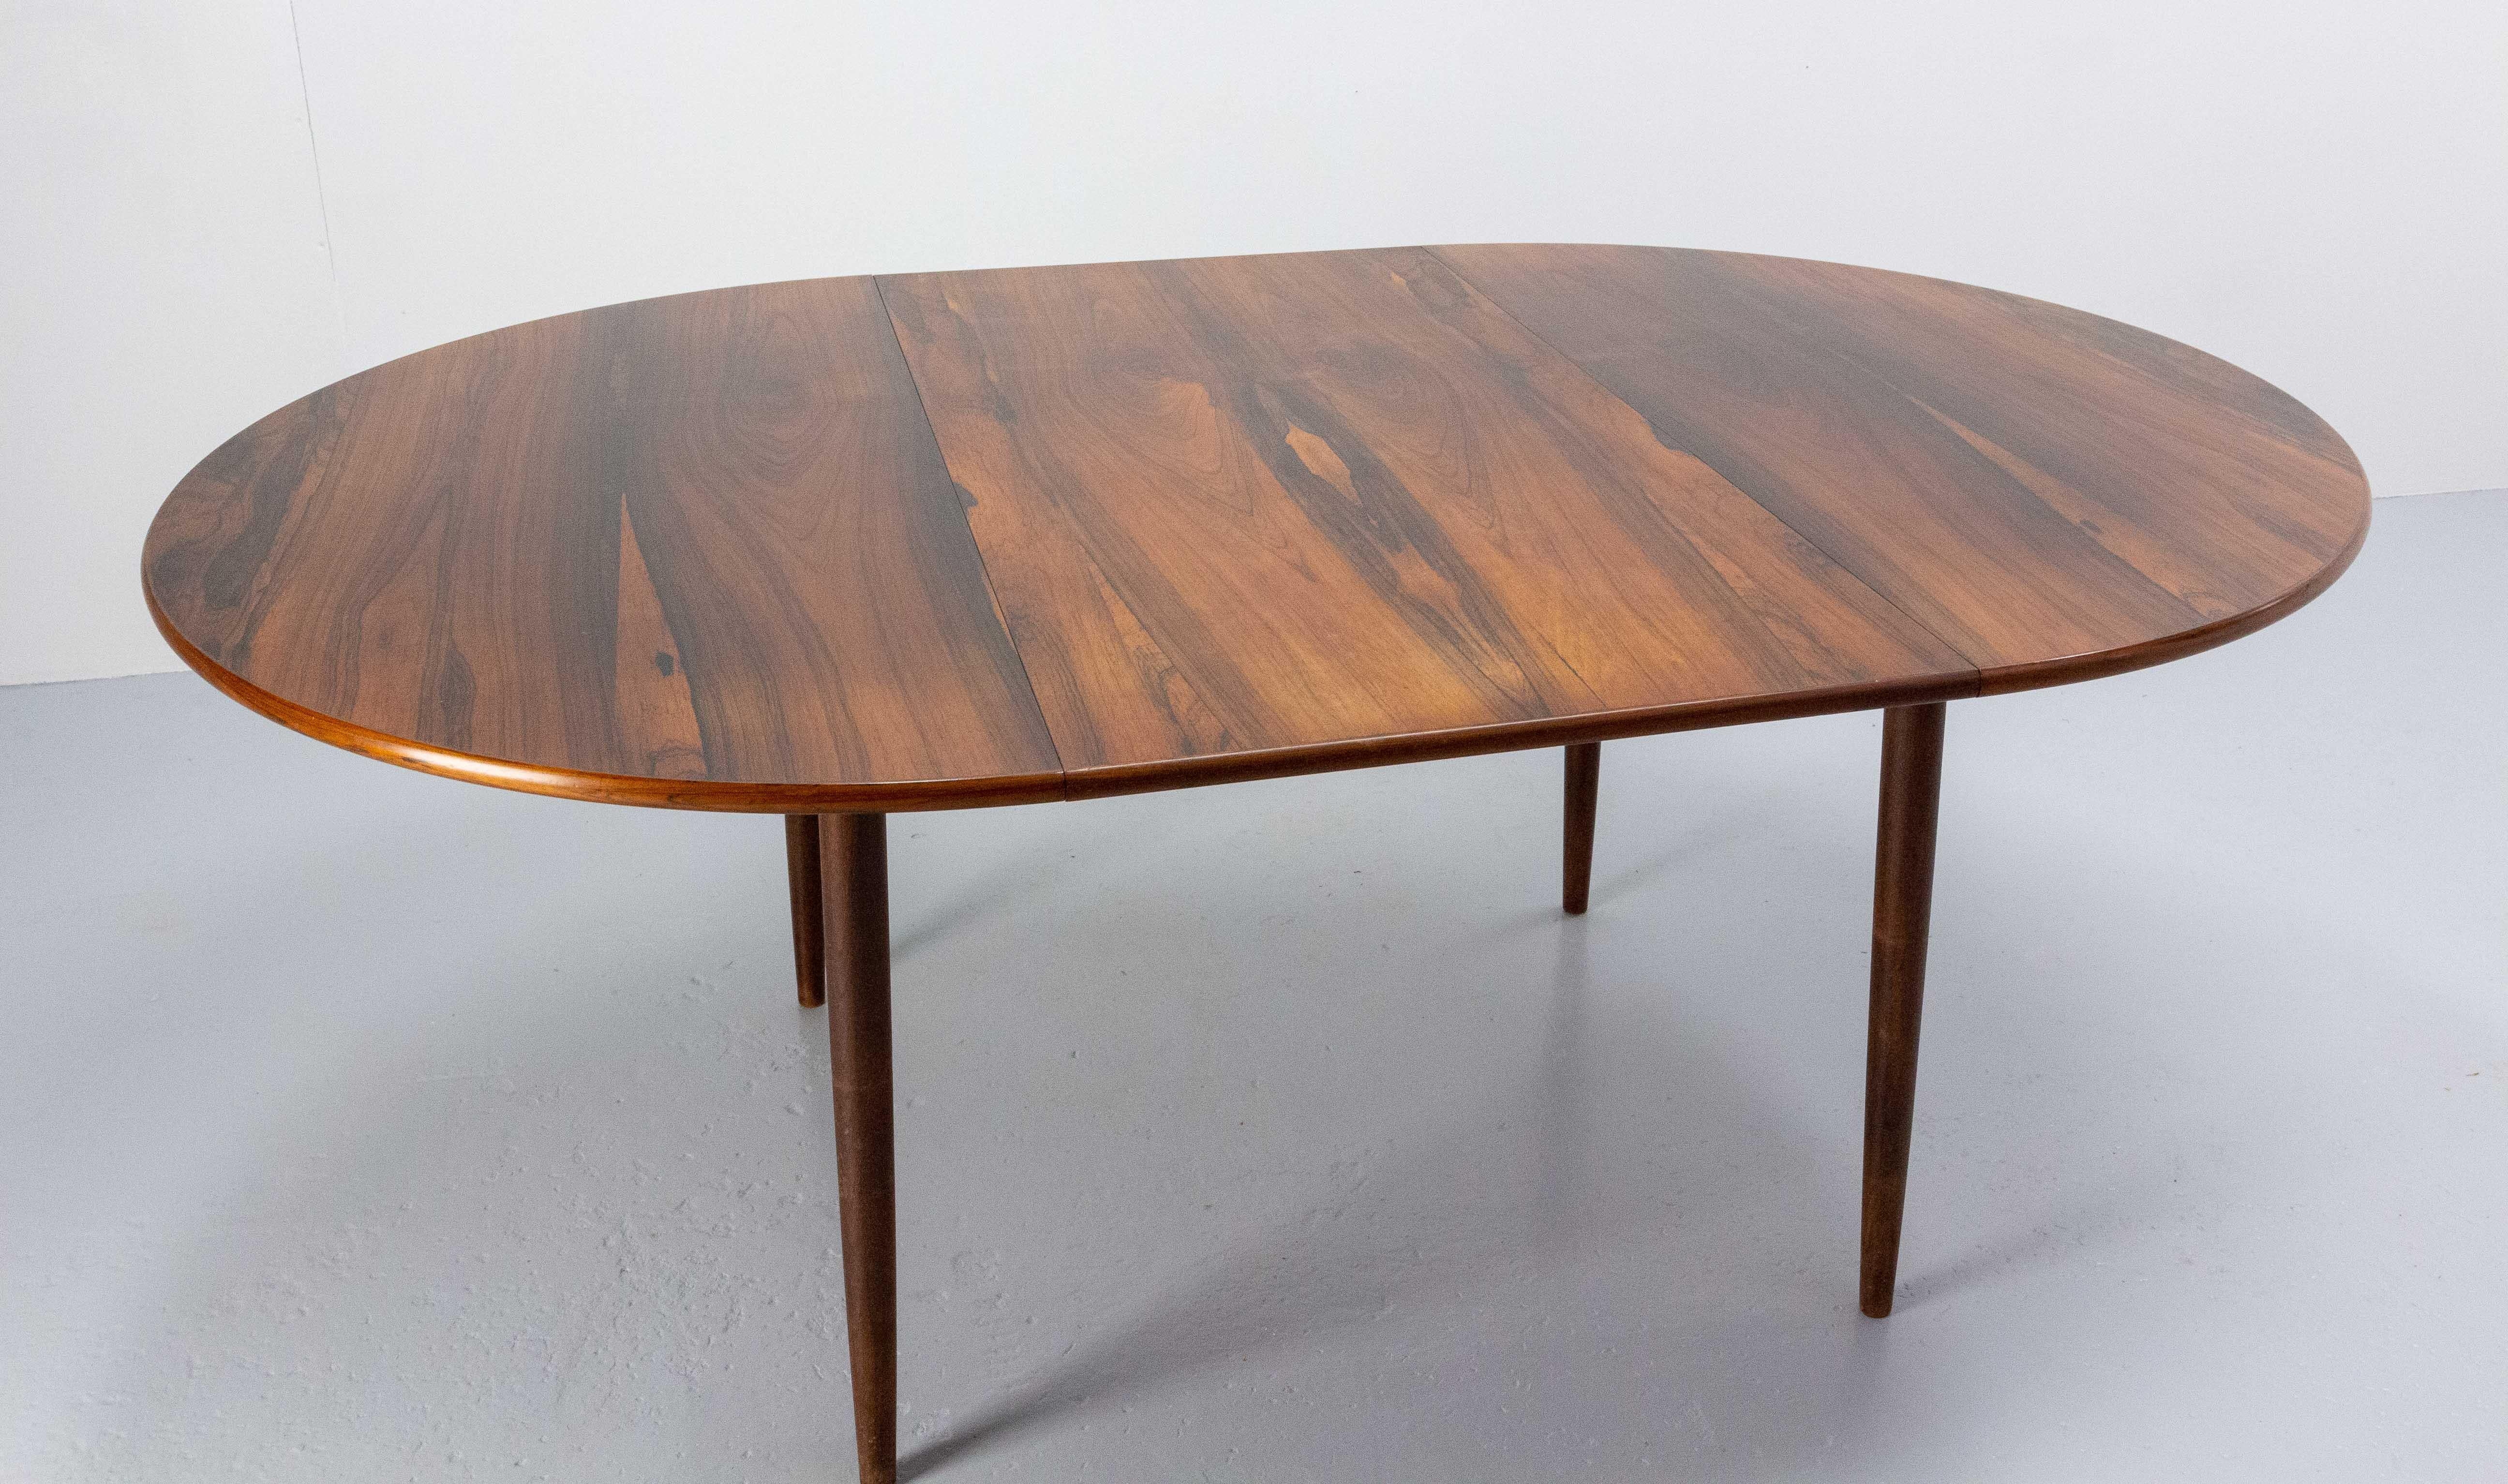 Danish extending dining table, mid-century.
Elsteds Mobelfabrik table
Very nice red exotic wood.
Dimension without the extension: diameter: 47.24 in. (120 cm) with the leaves inserted is 70in/180 cm
Good condition with little scratches on the